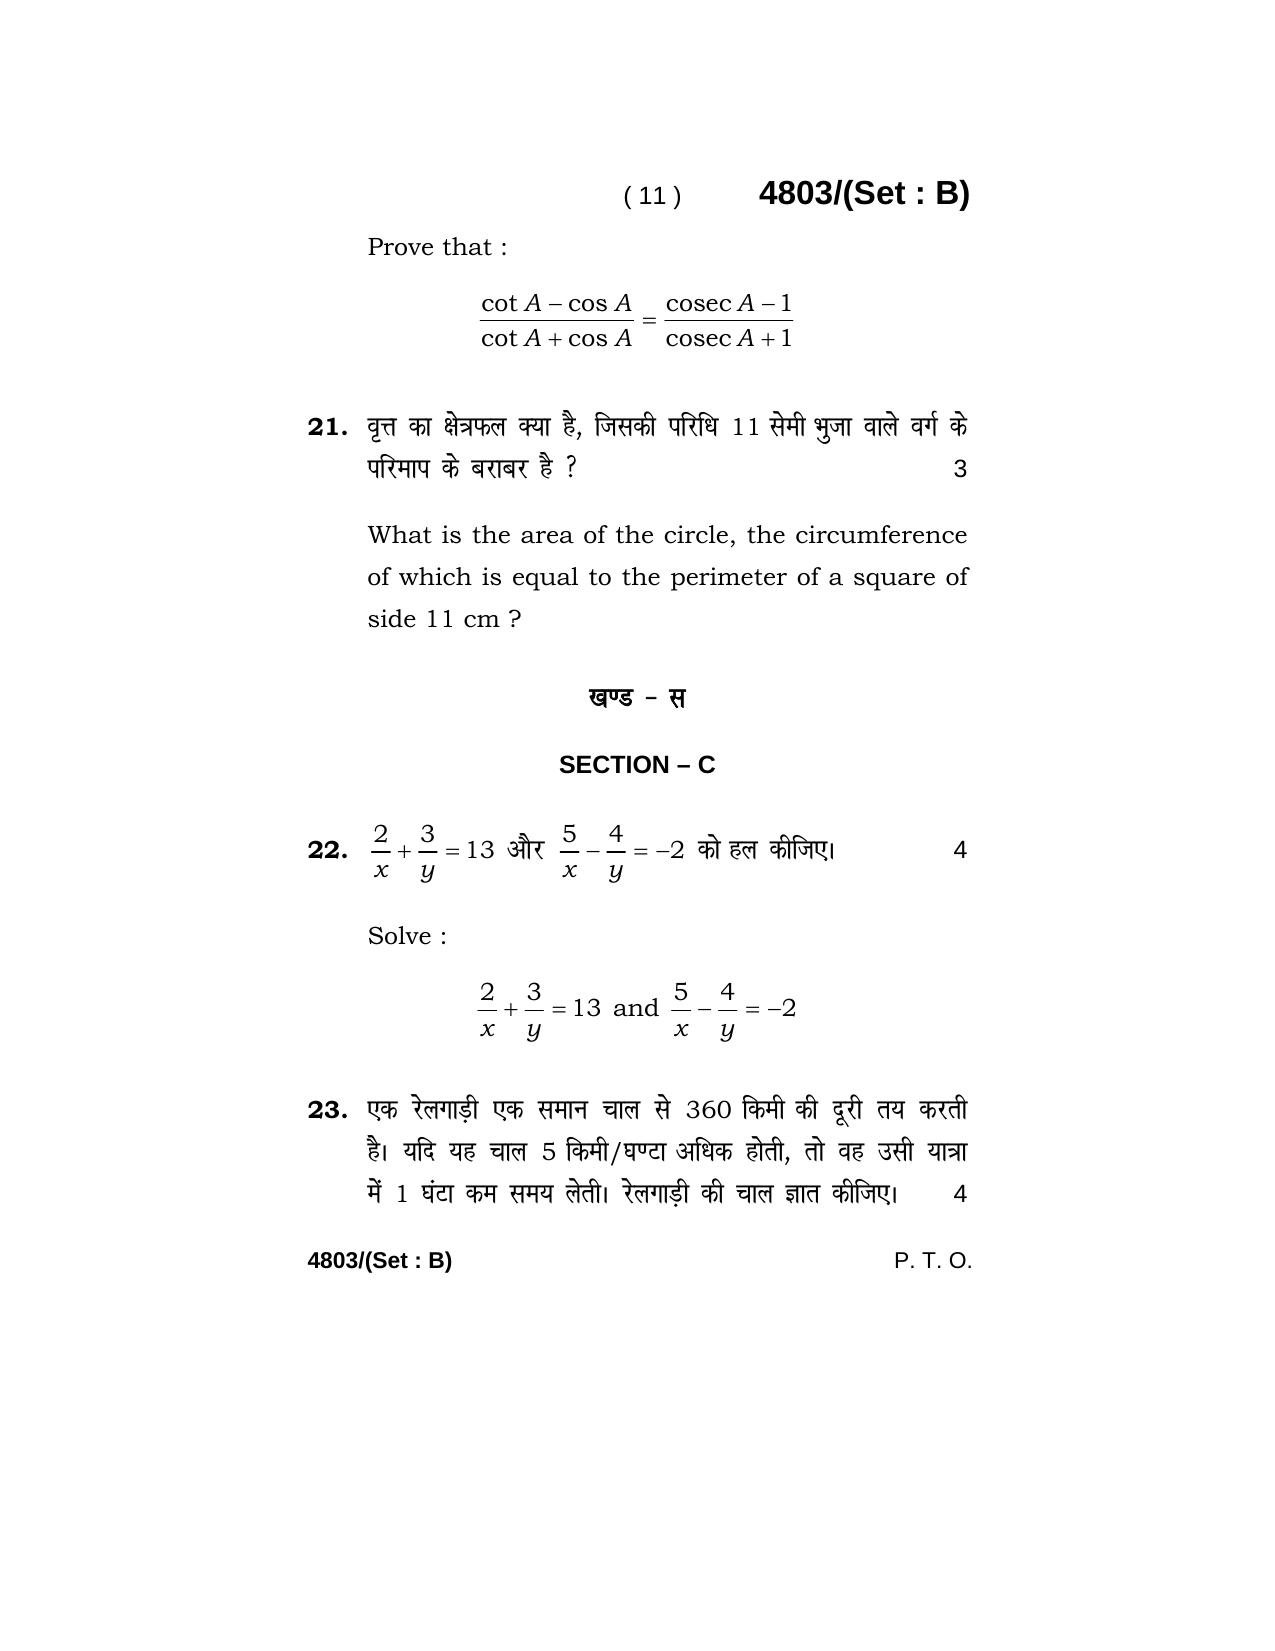 Haryana Board HBSE Class 10 Mathematics 2020 Question Paper - Page 27